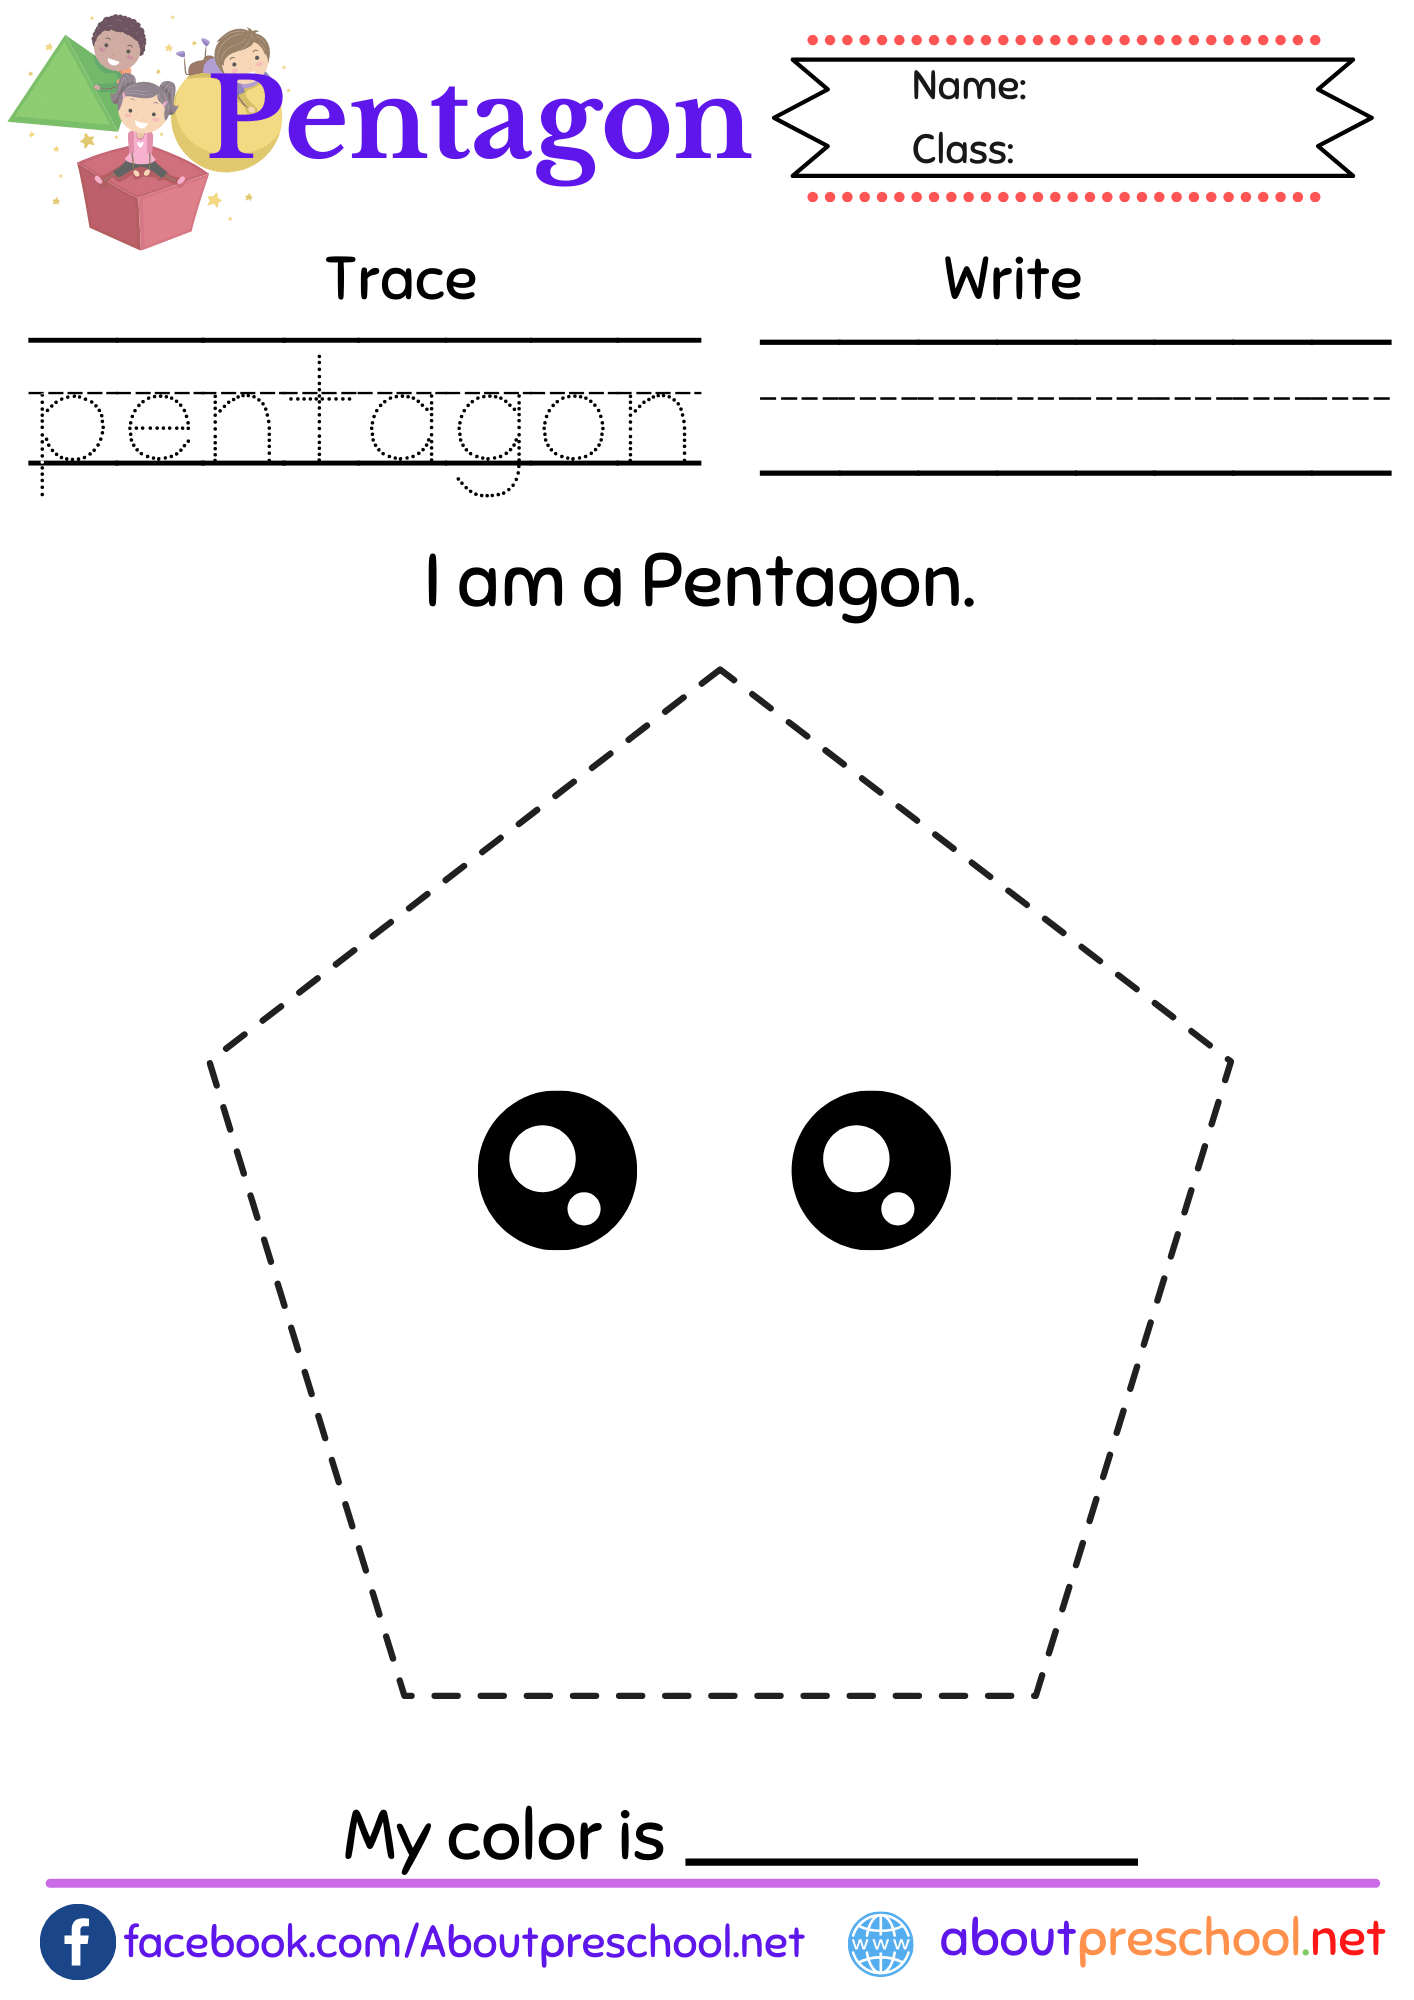 Trace and Color the pentagon worksheet